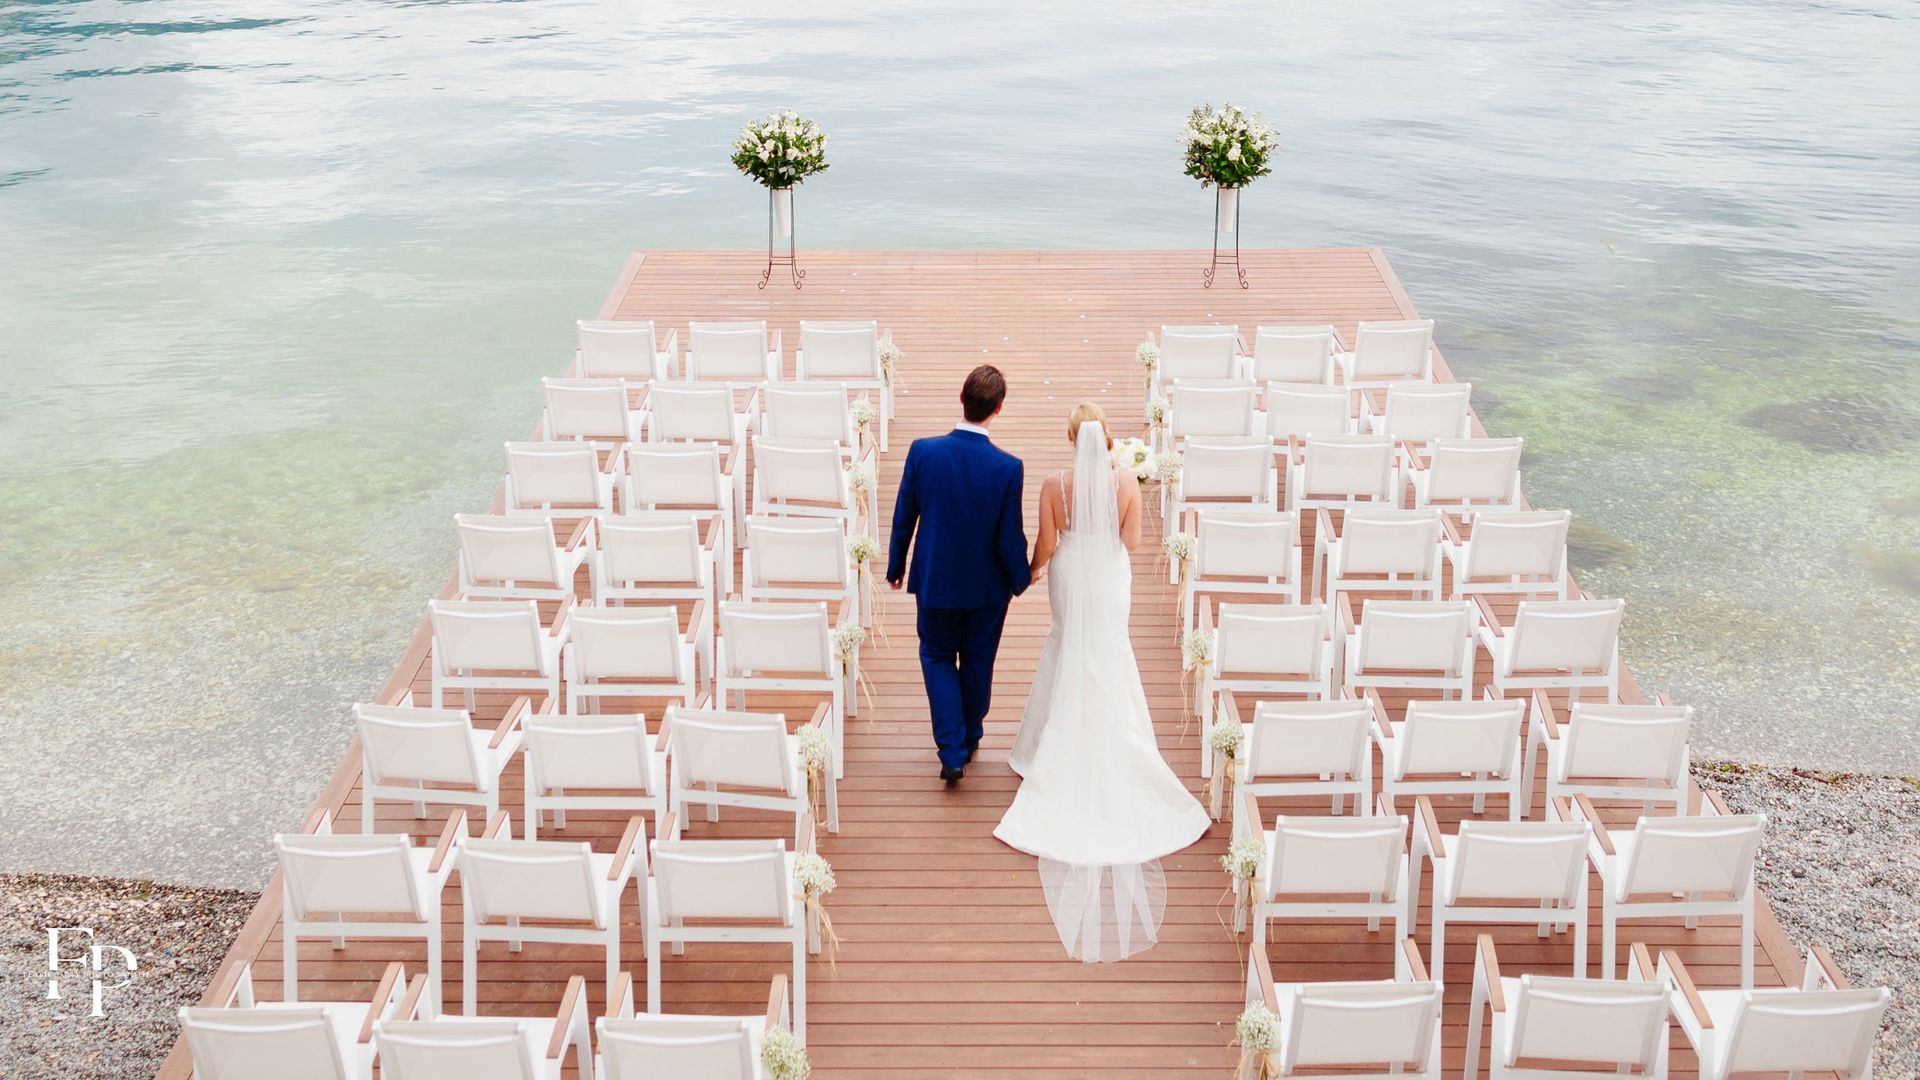 The bride and groom walk towards their wedding venue in Manor, at a beach where the ceremony will take place